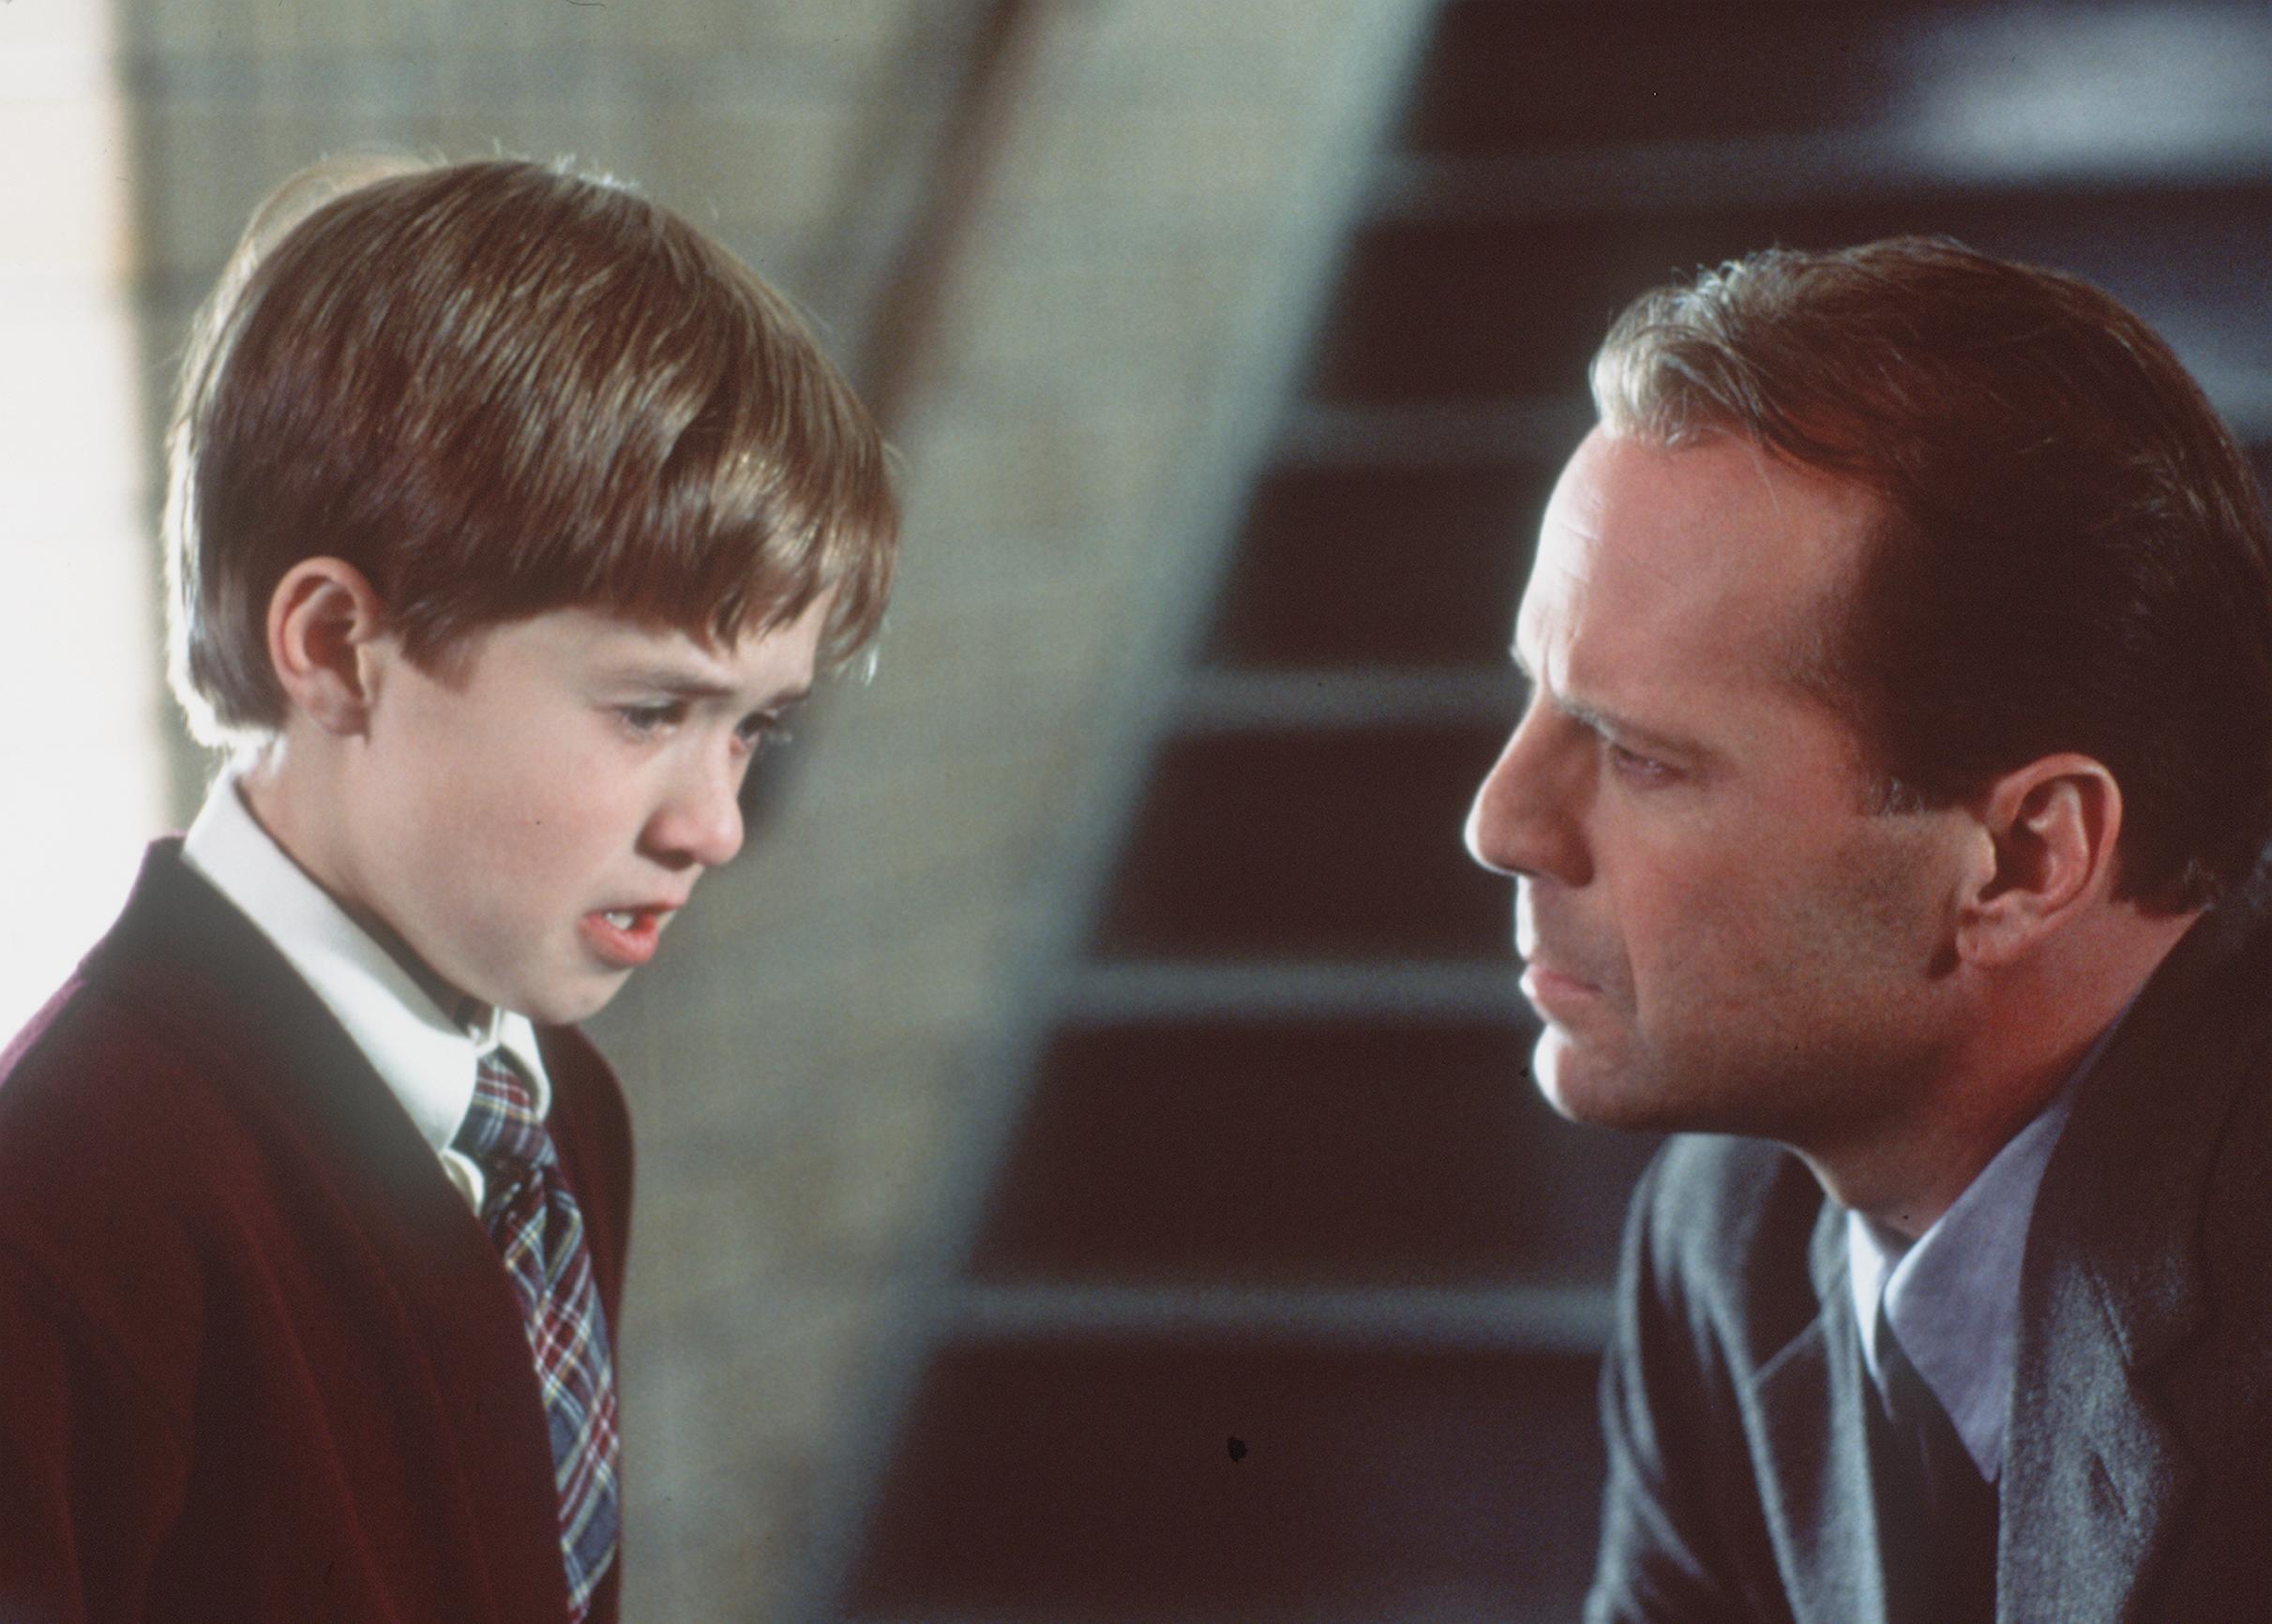 Child prodigy and Bruce Willis on the set of "The Sixth Sense," 1999 | Source: Getty Image